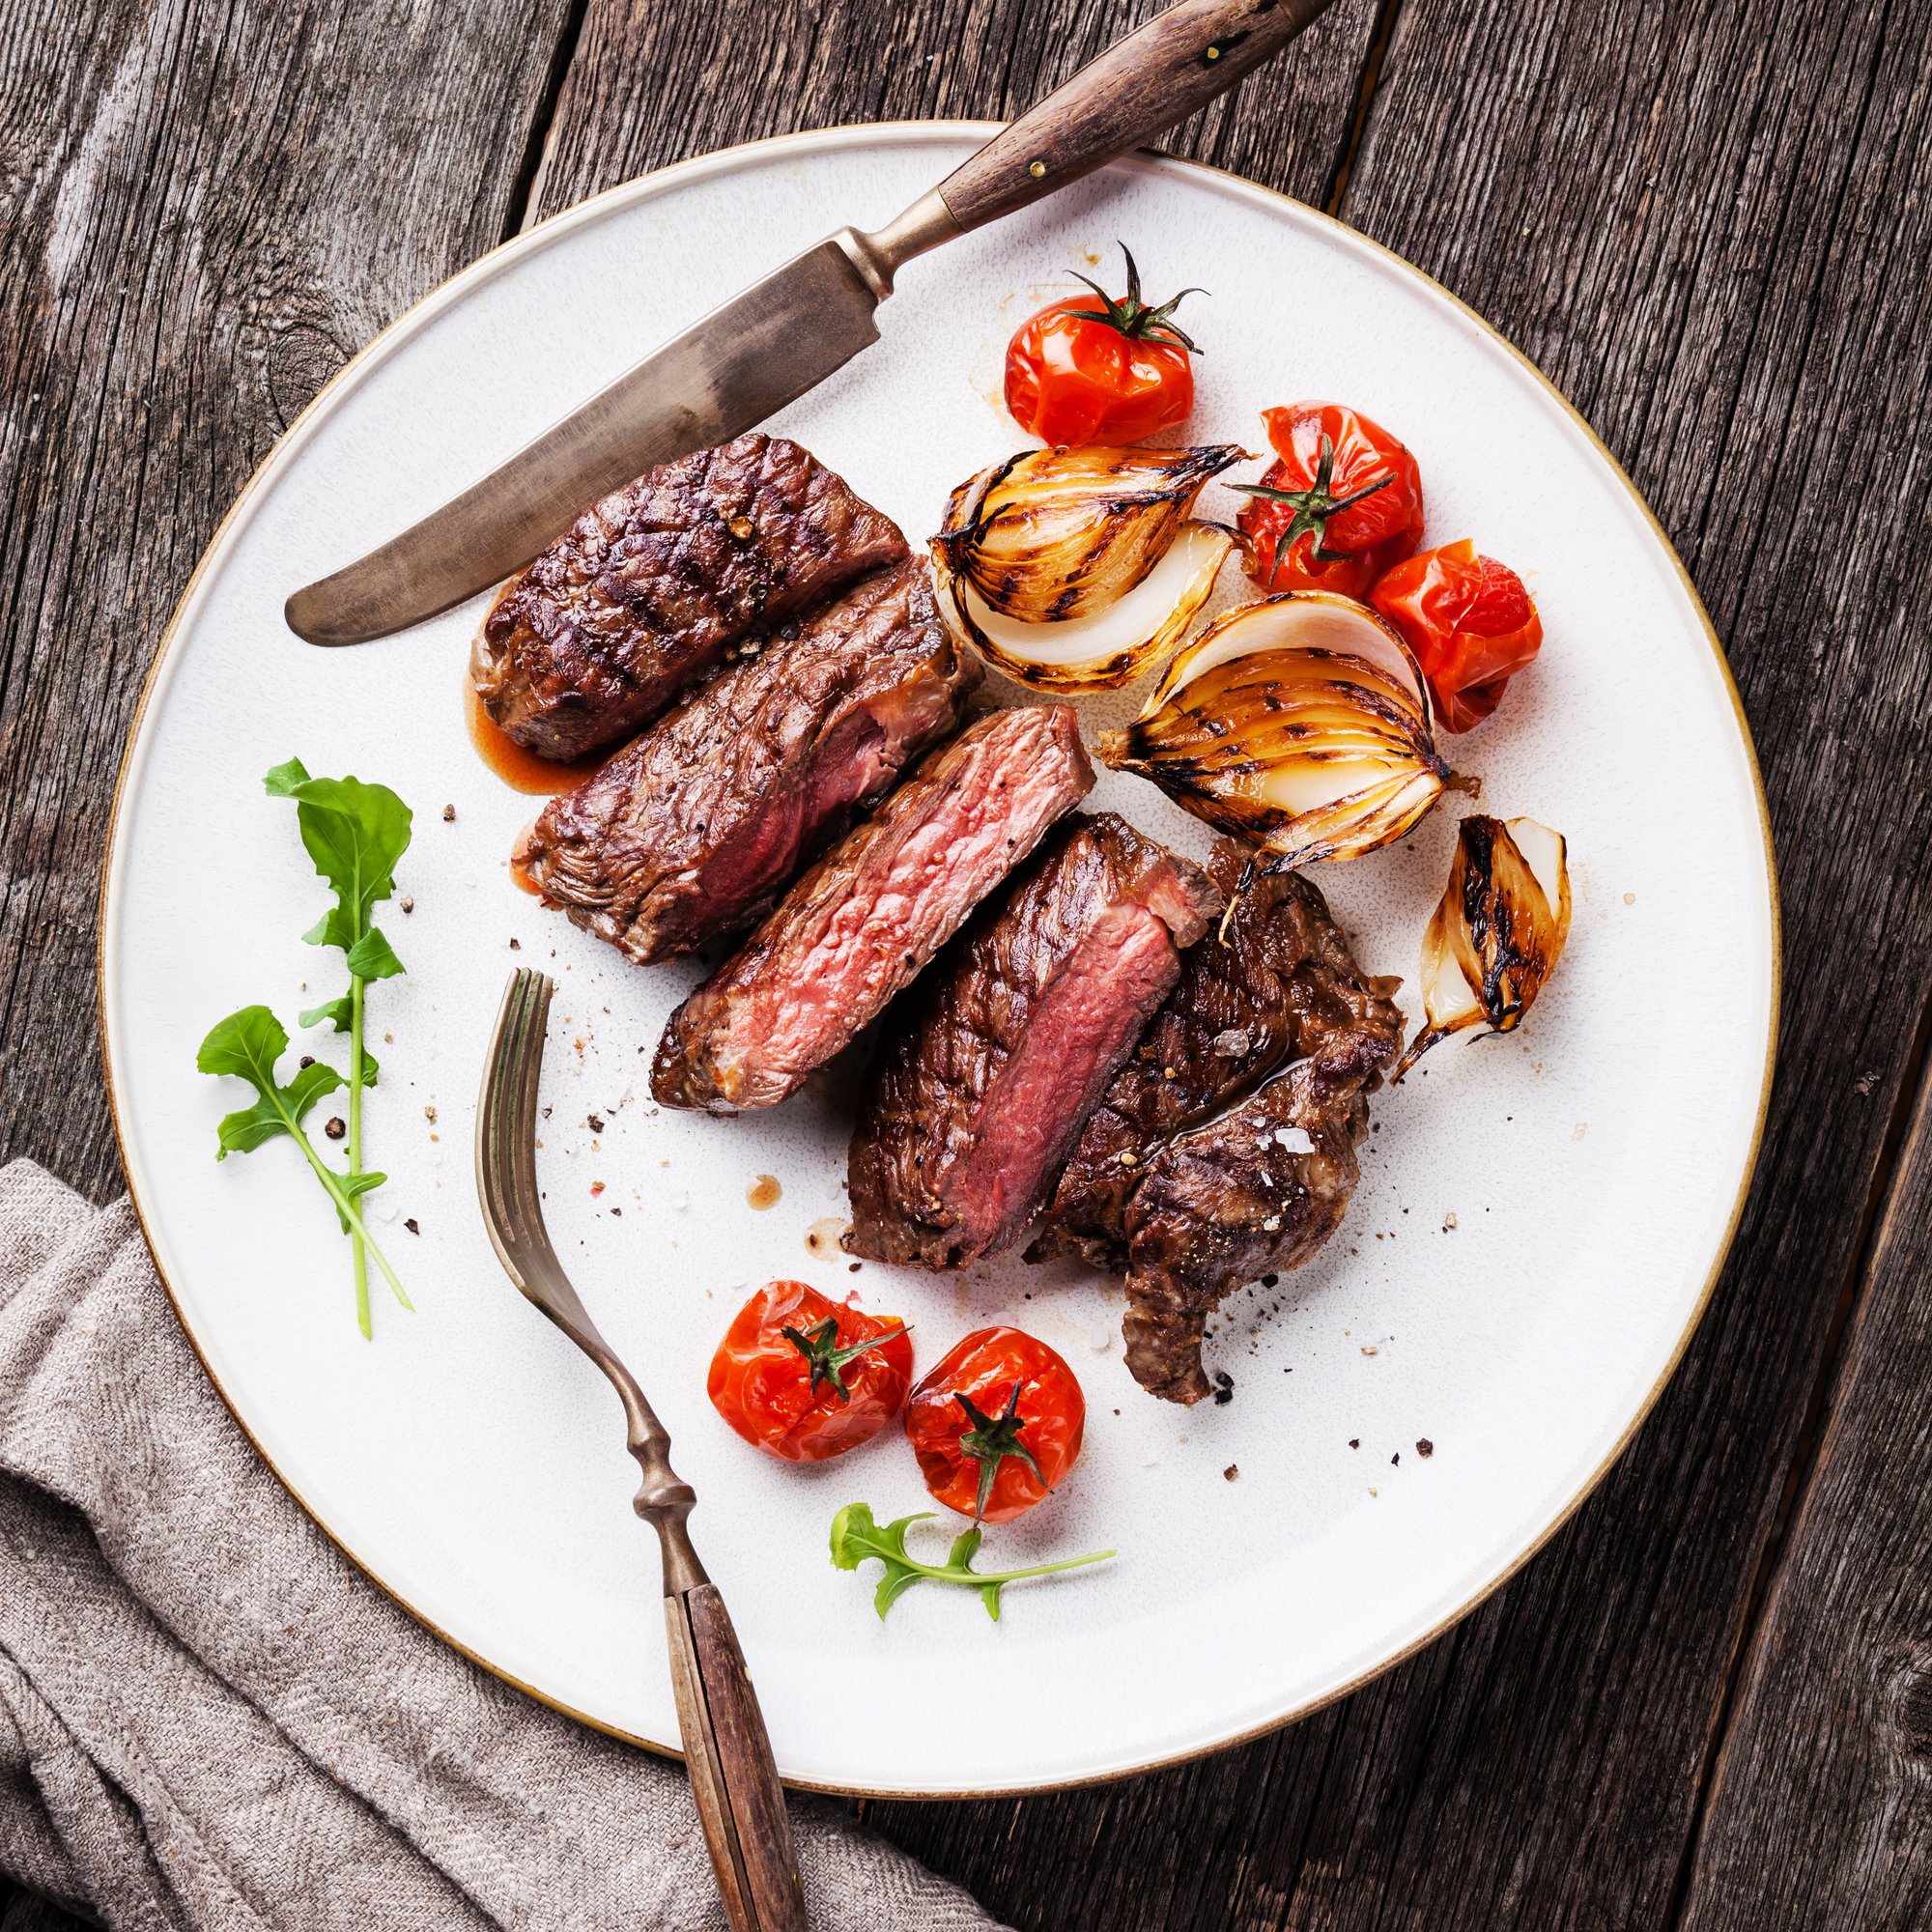 Sliced medium rare grilled Beef steak Ribeye with grilled onions and cherry tomatoes on plate on wooden background